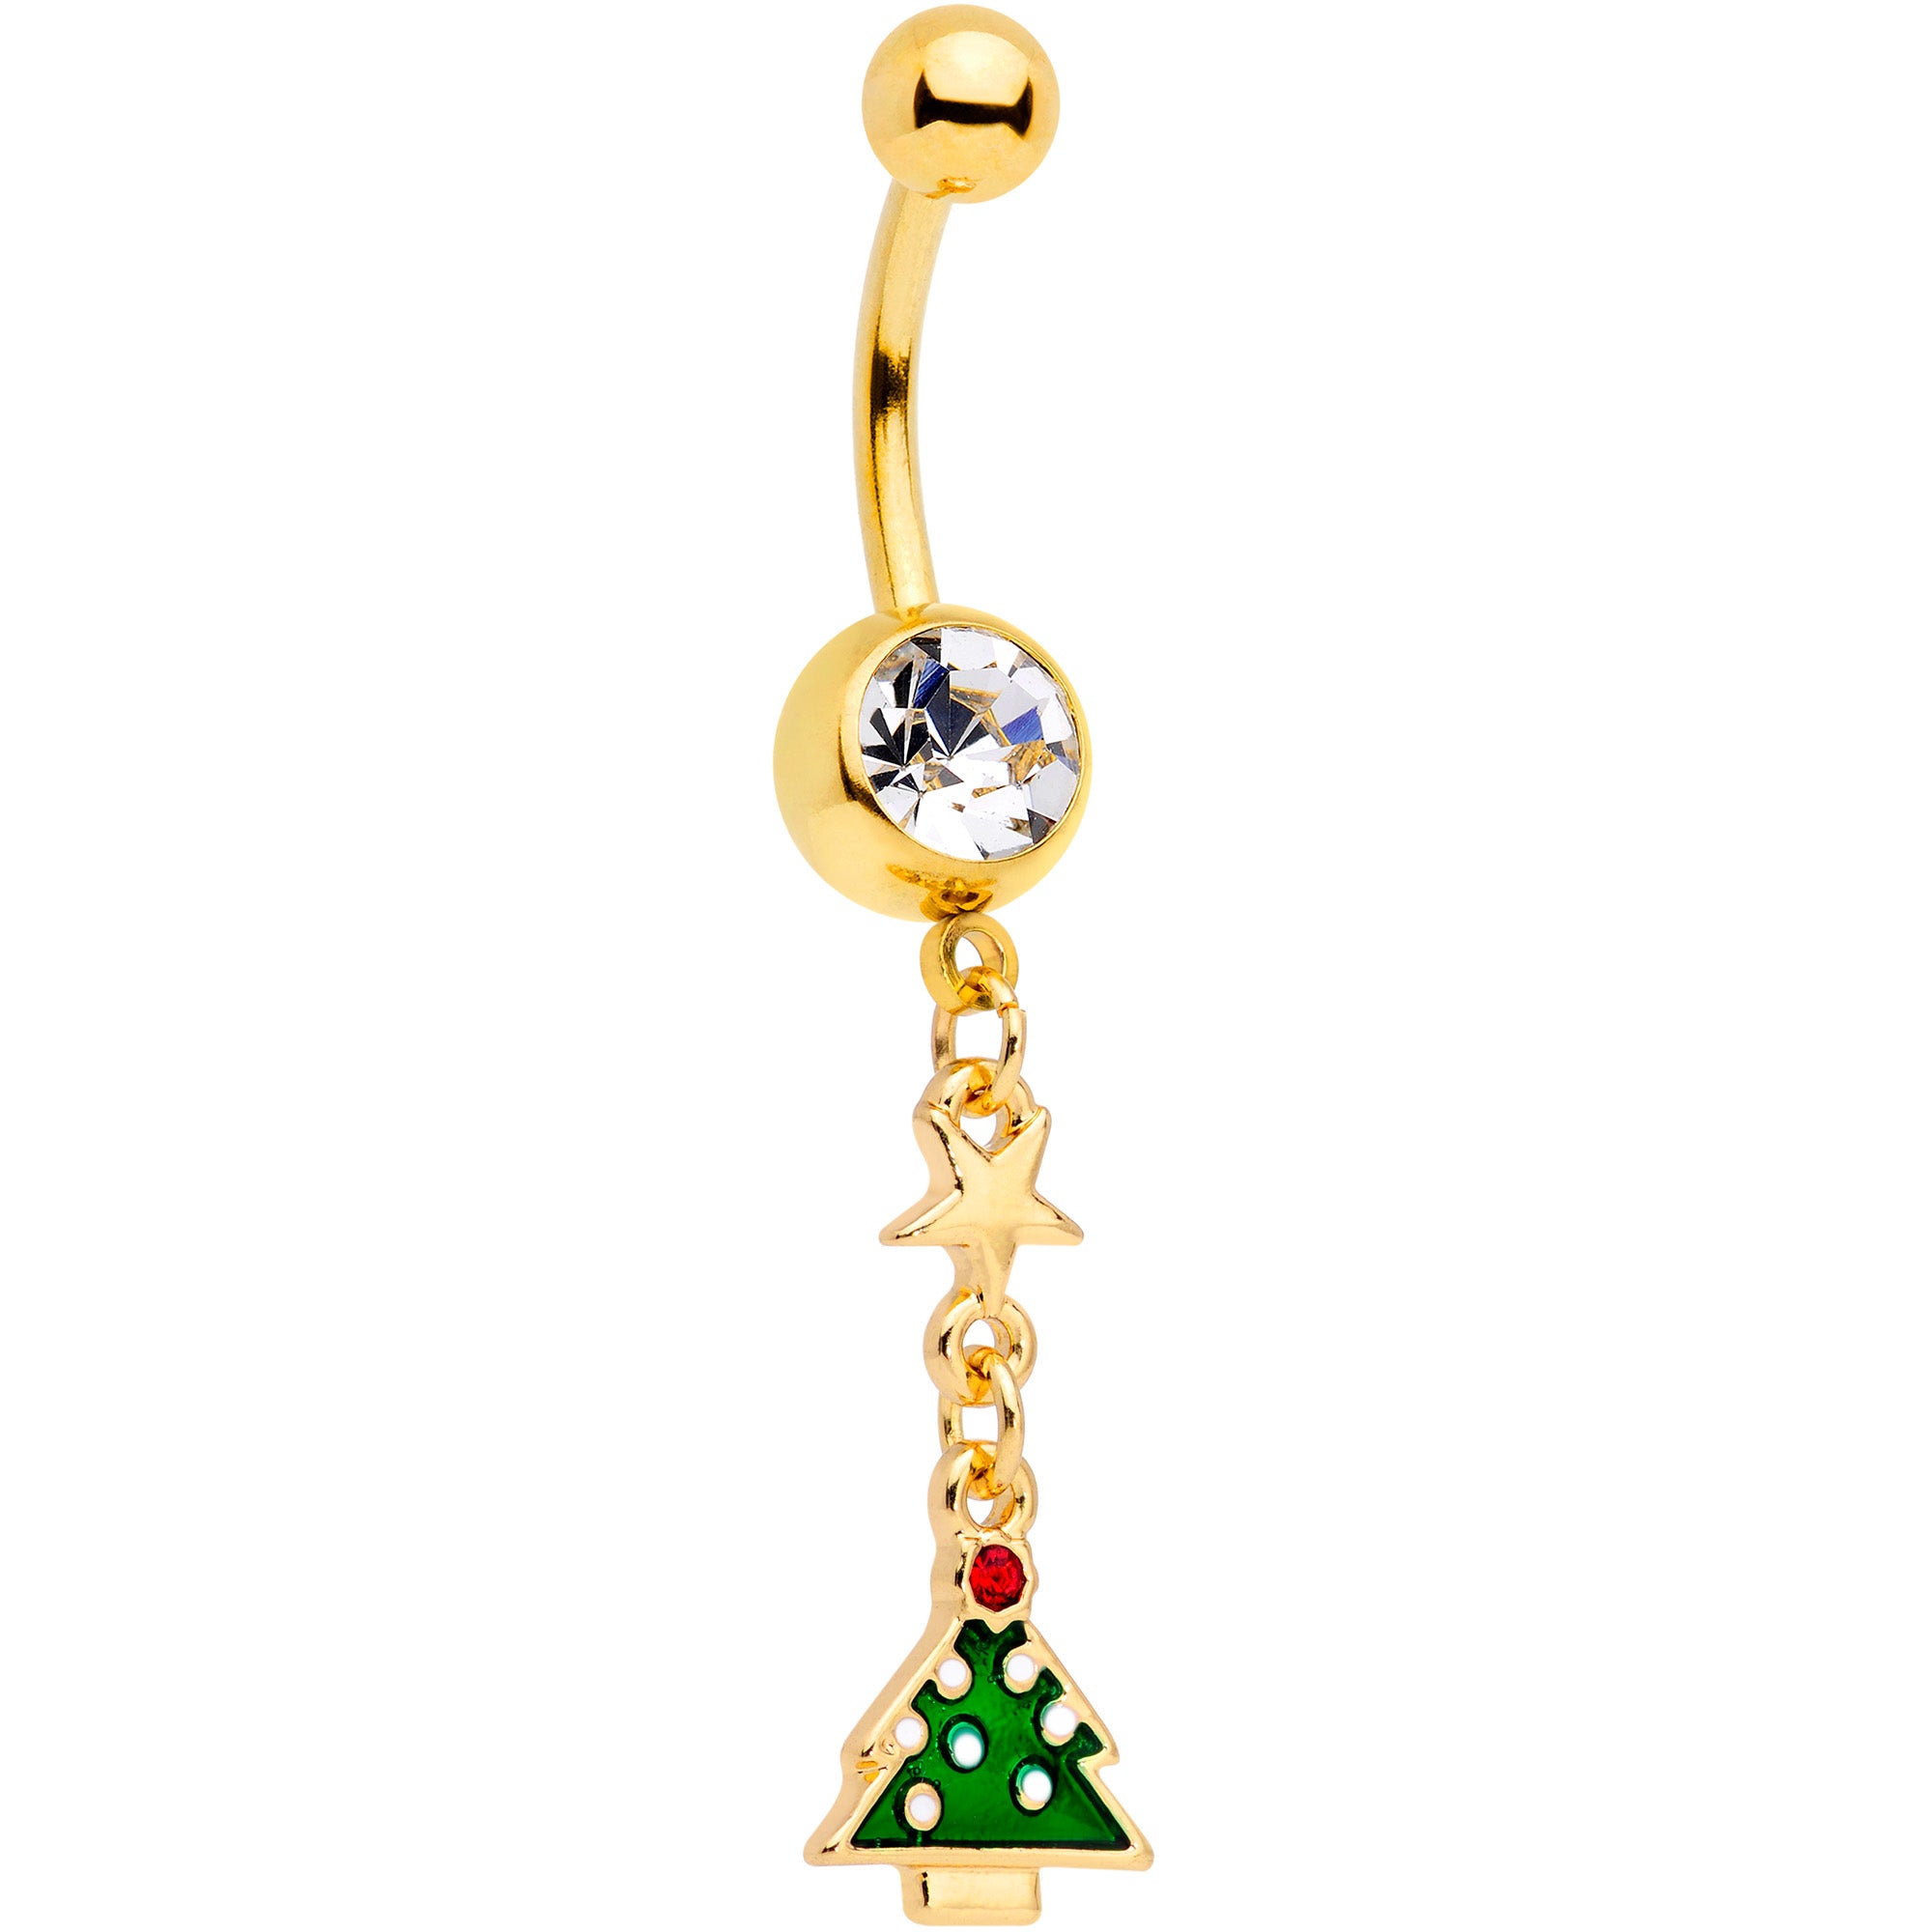 Clear Gem Gold Tone Santa Christmas Tree Dangle Belly Ring Set of 2